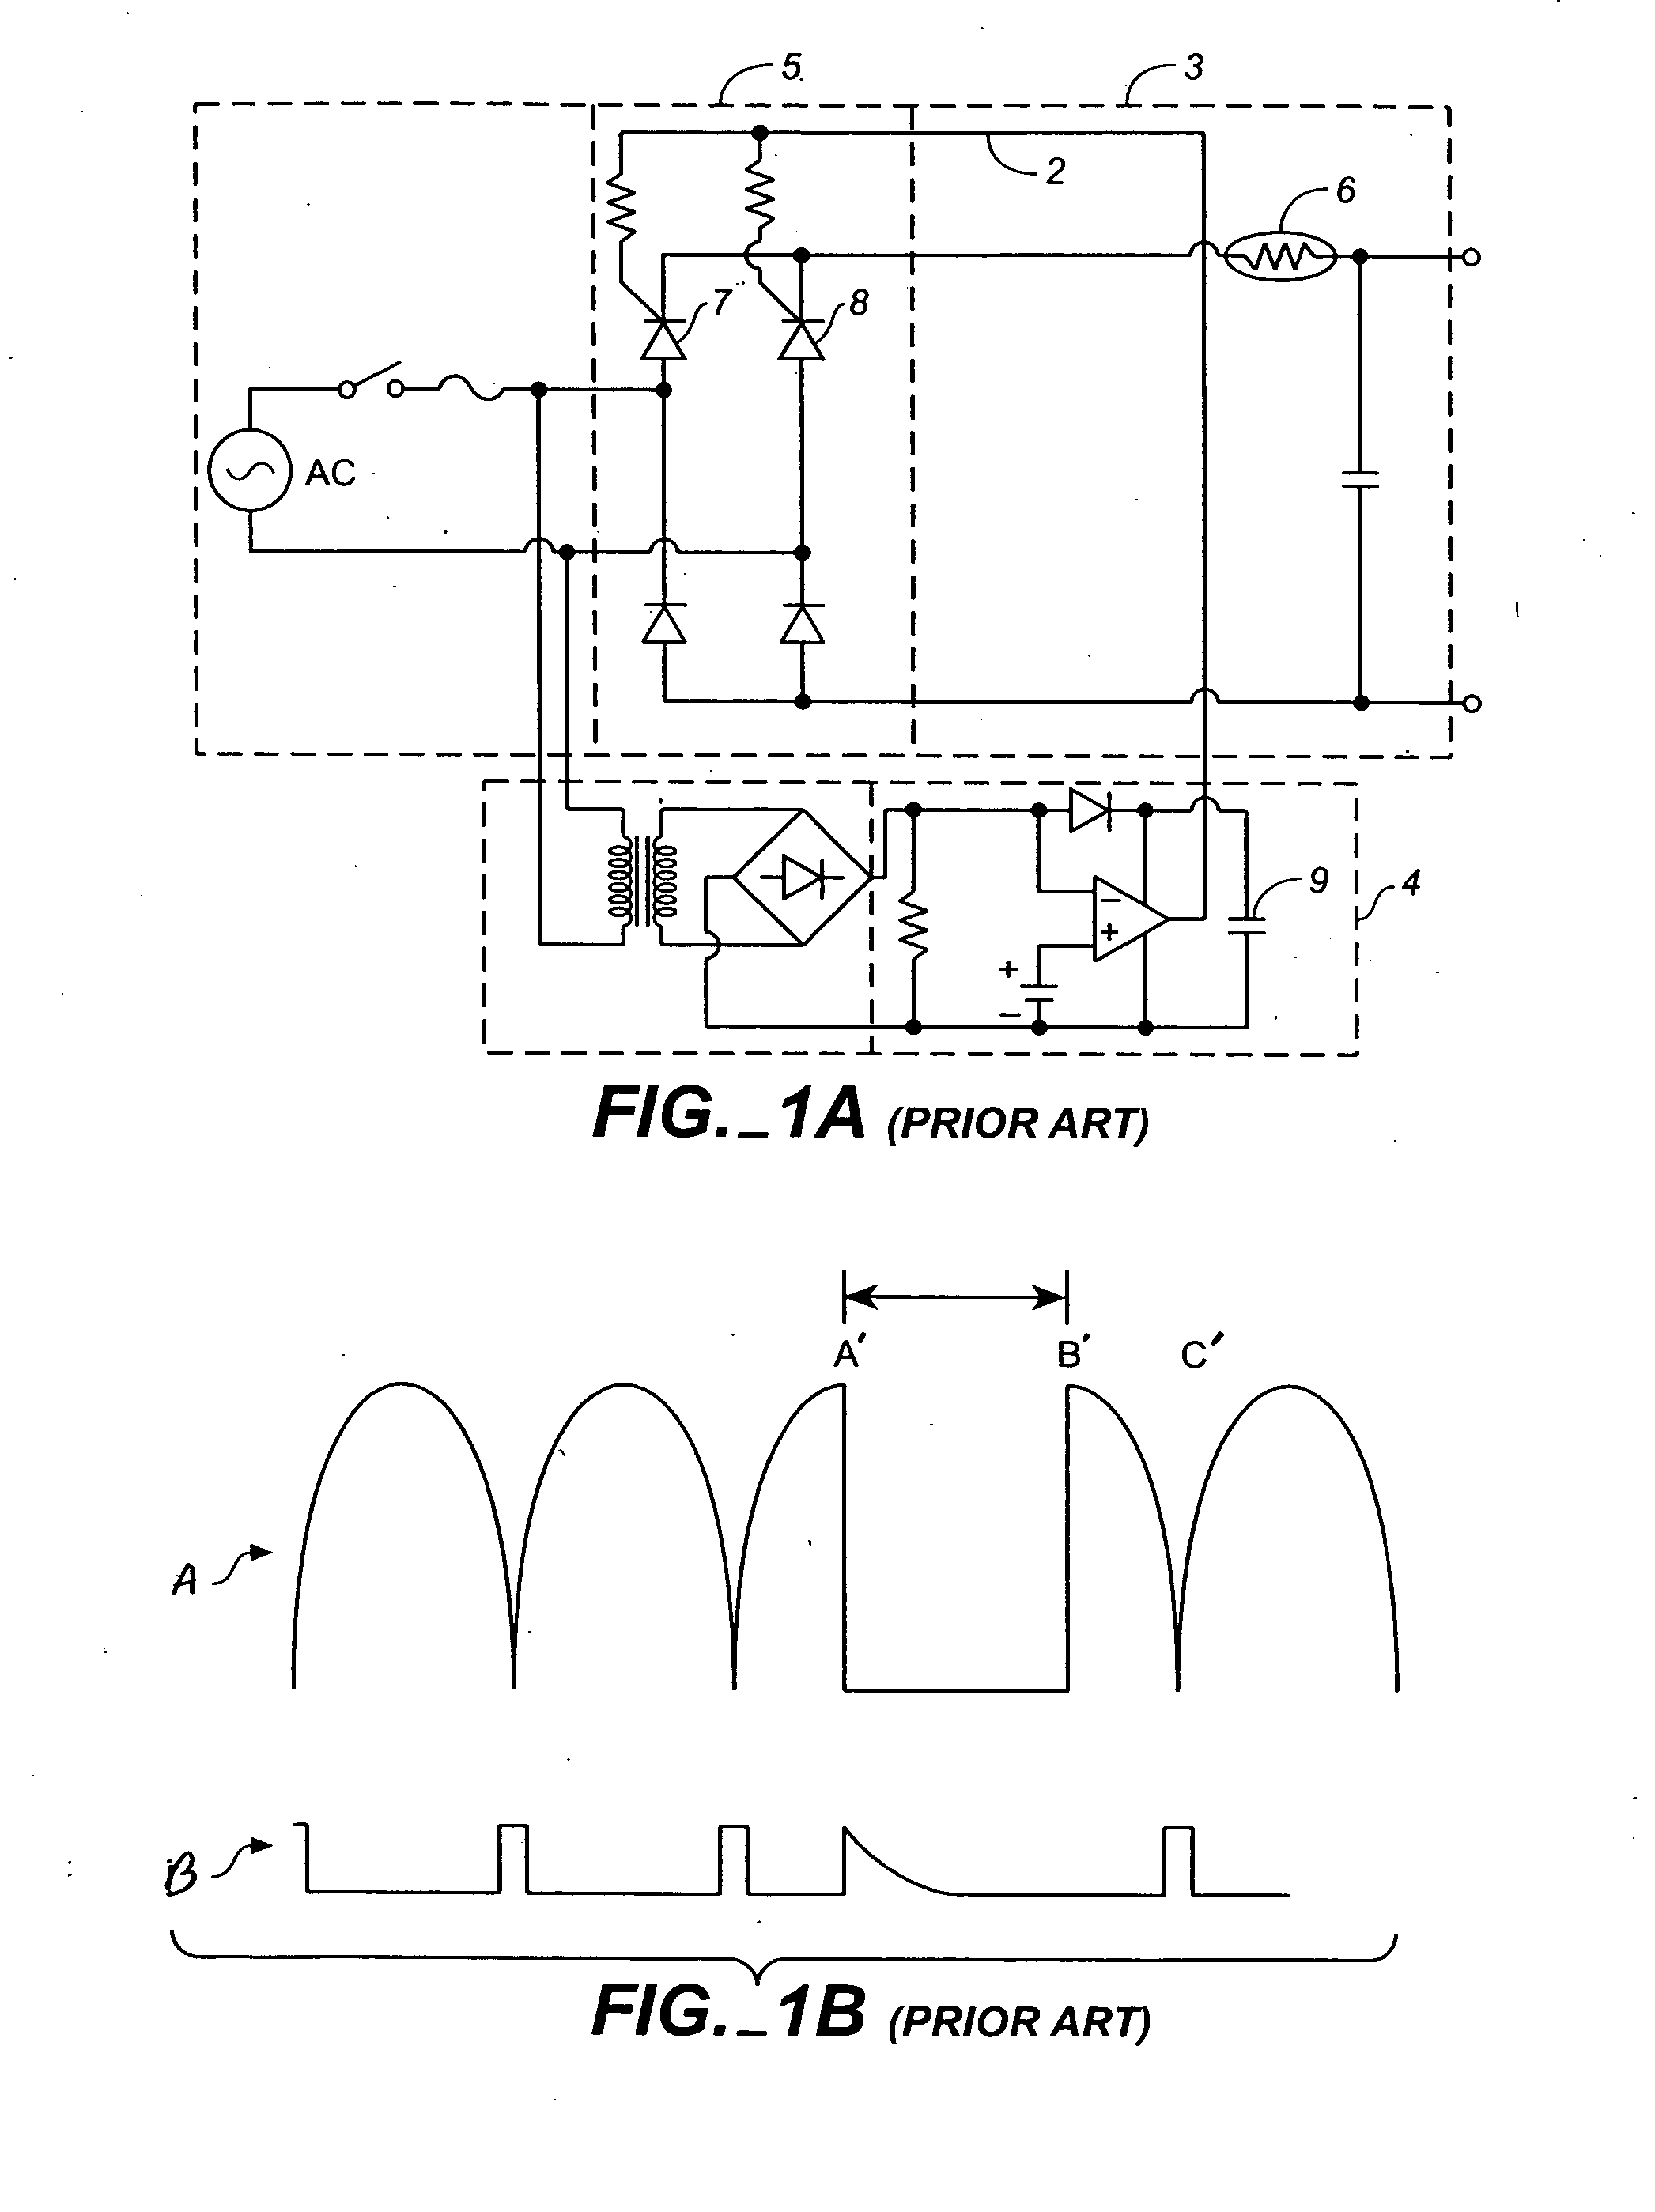 Active inrush current control using a relay for AC to DC converters